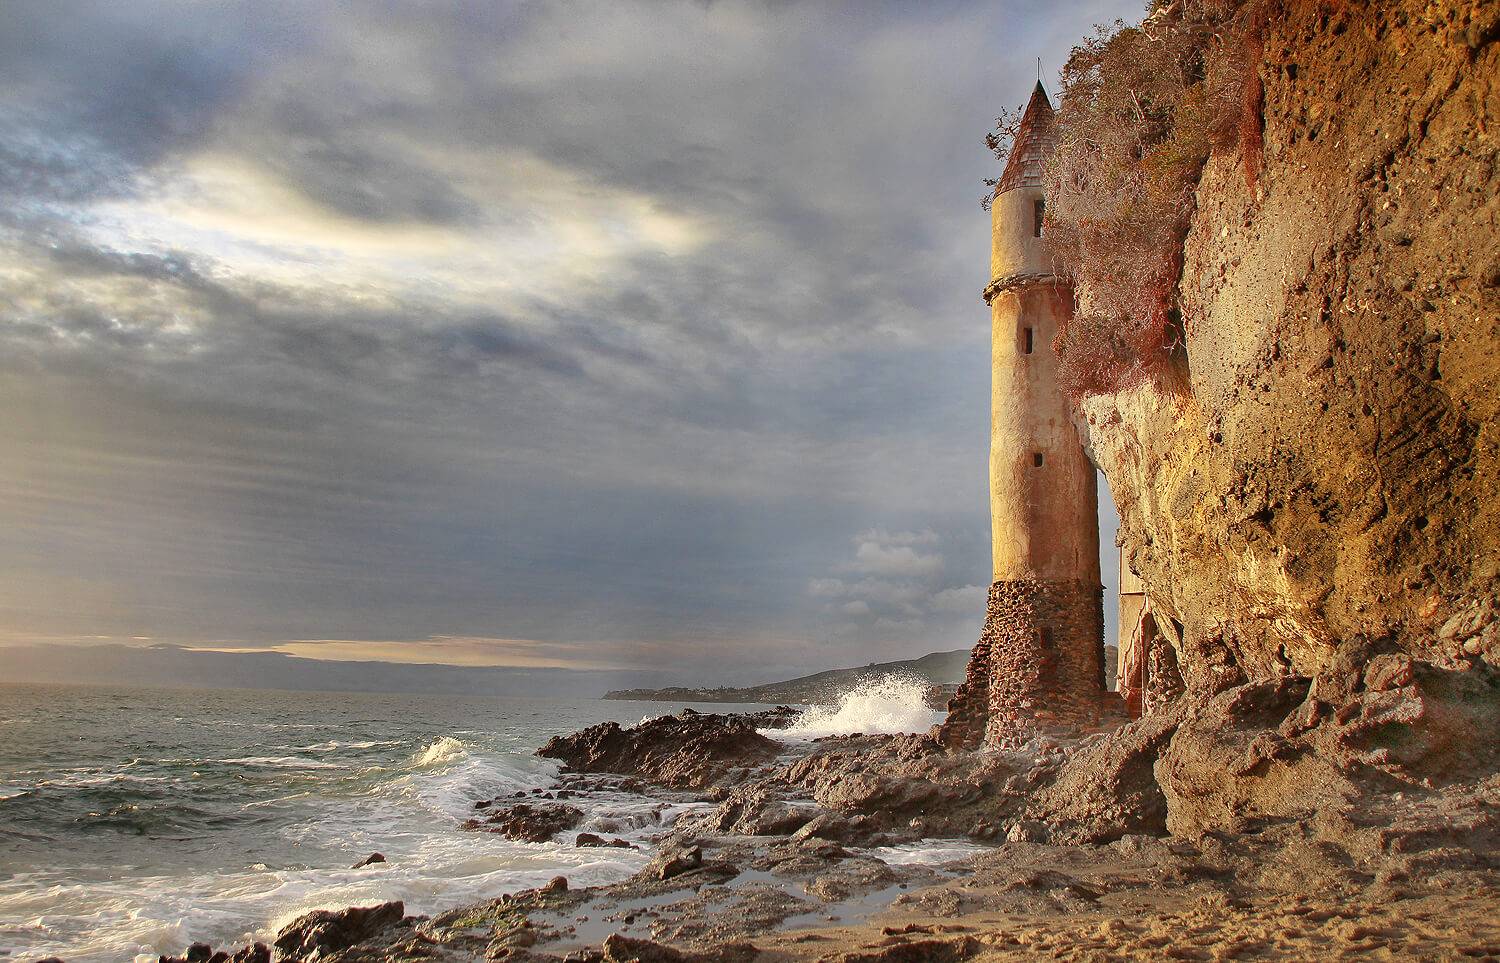 Pirate Tower is a castle that sits on the cove of Victoria Beach in Orange County